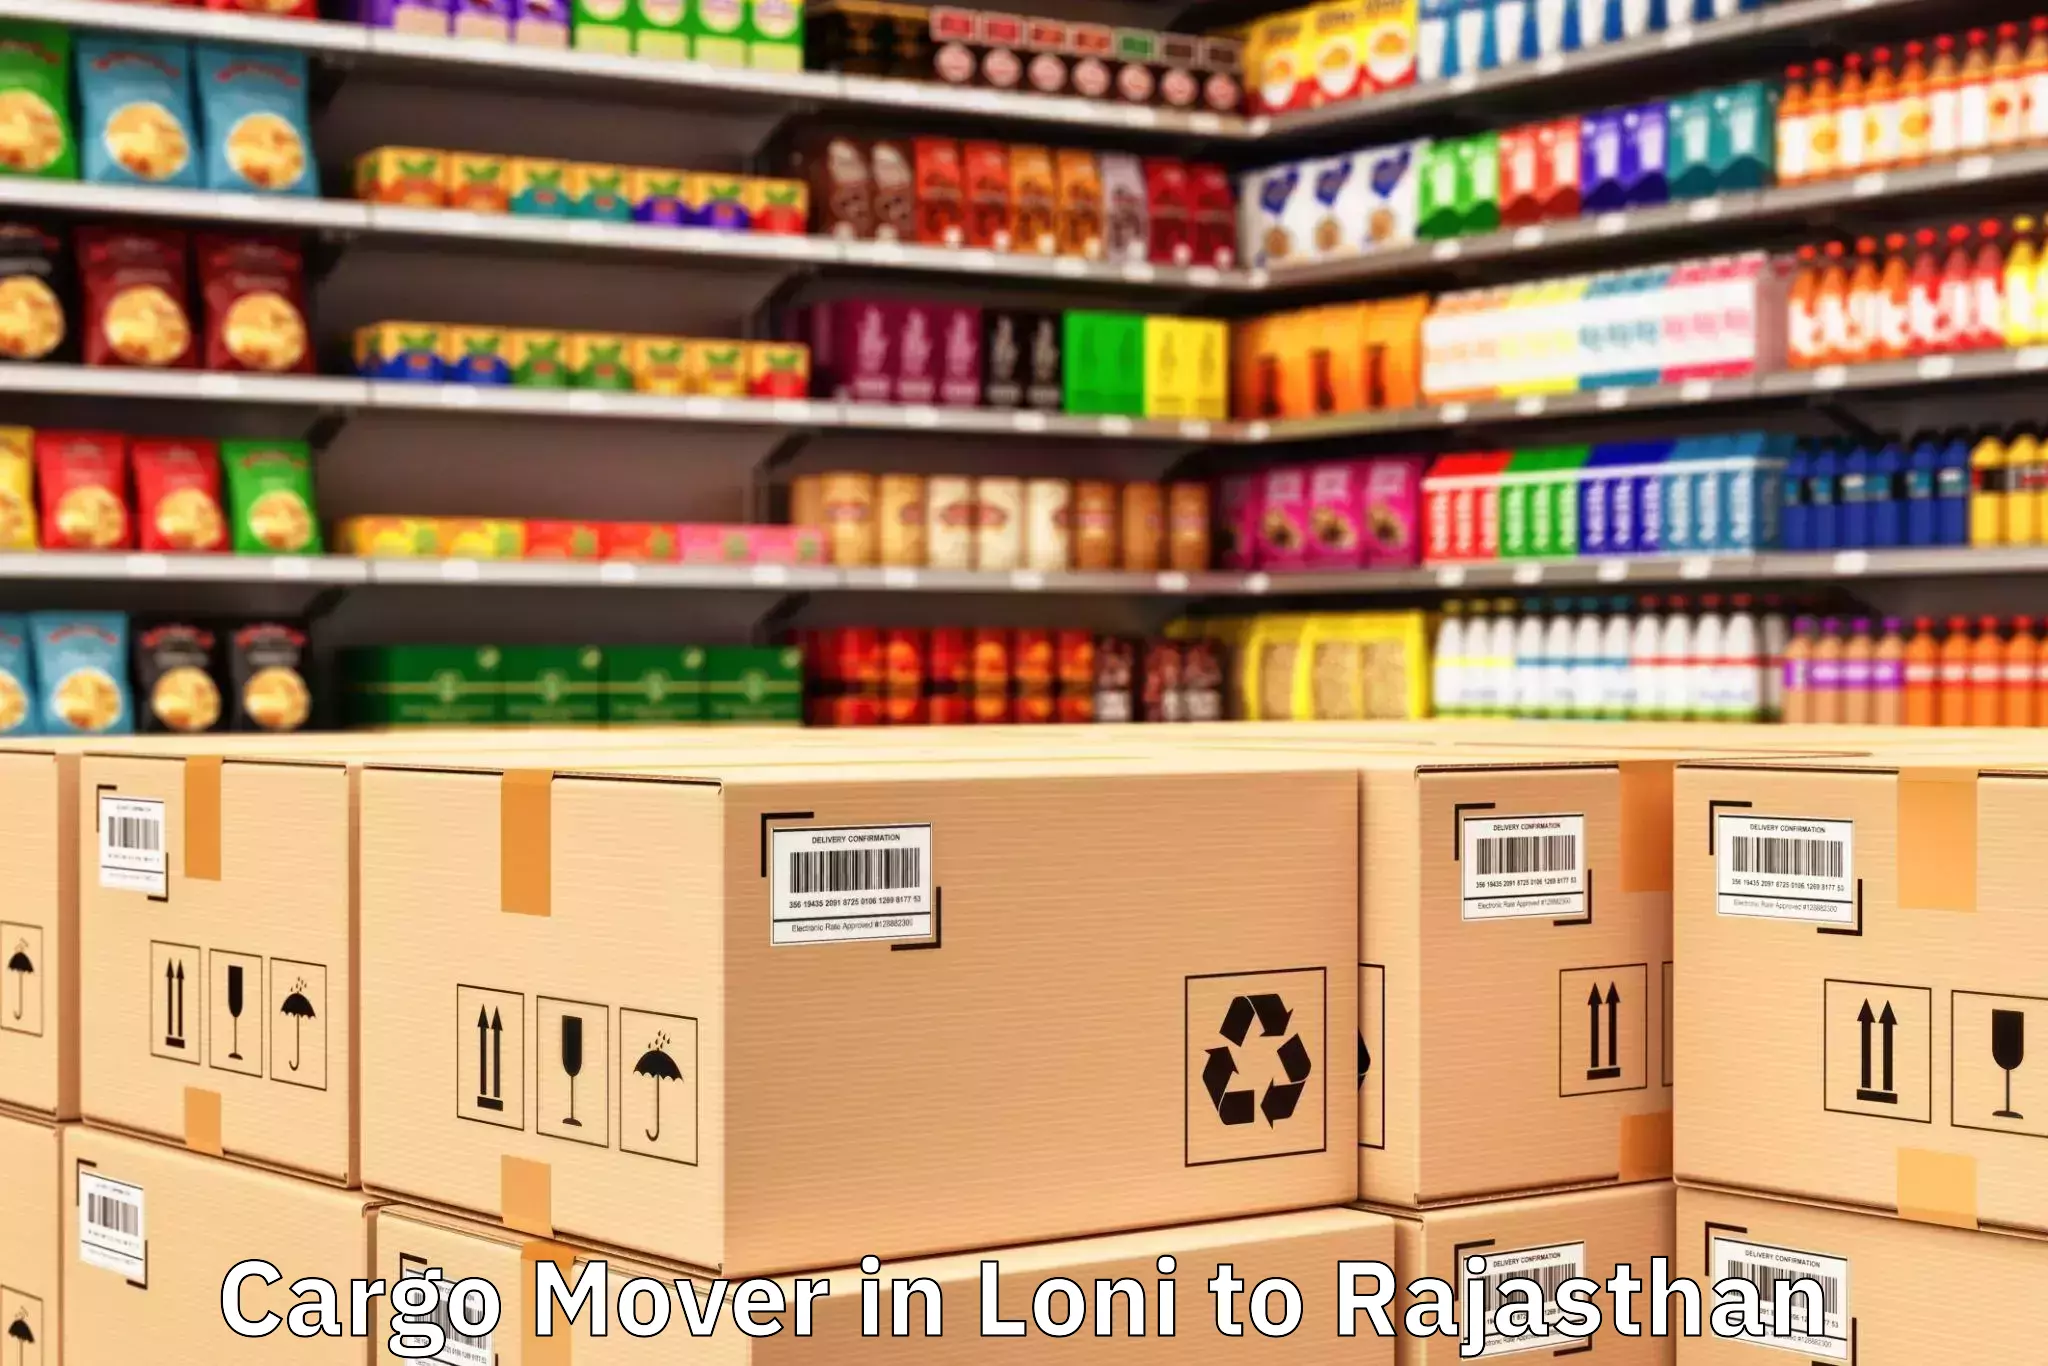 Efficient Loni to Rajasthan Cargo Mover